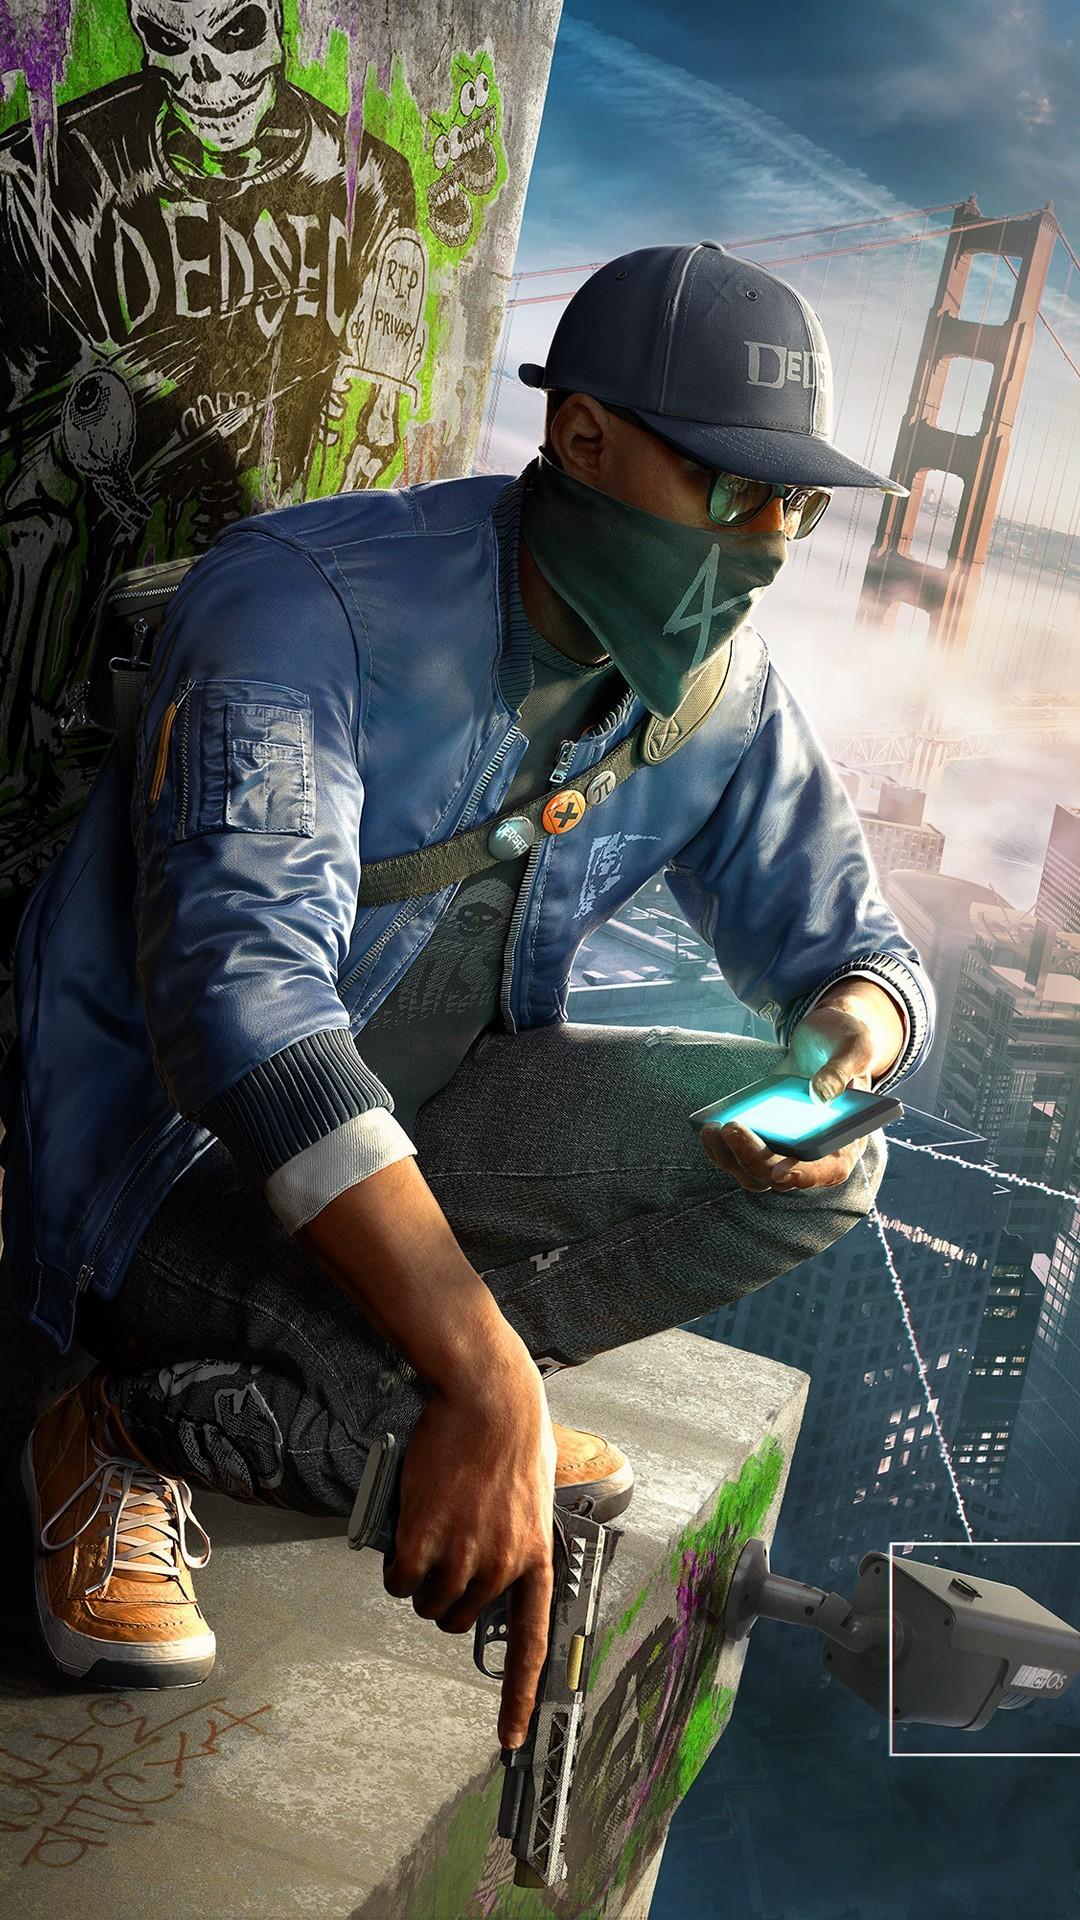 watch dogs 2 licence key free download